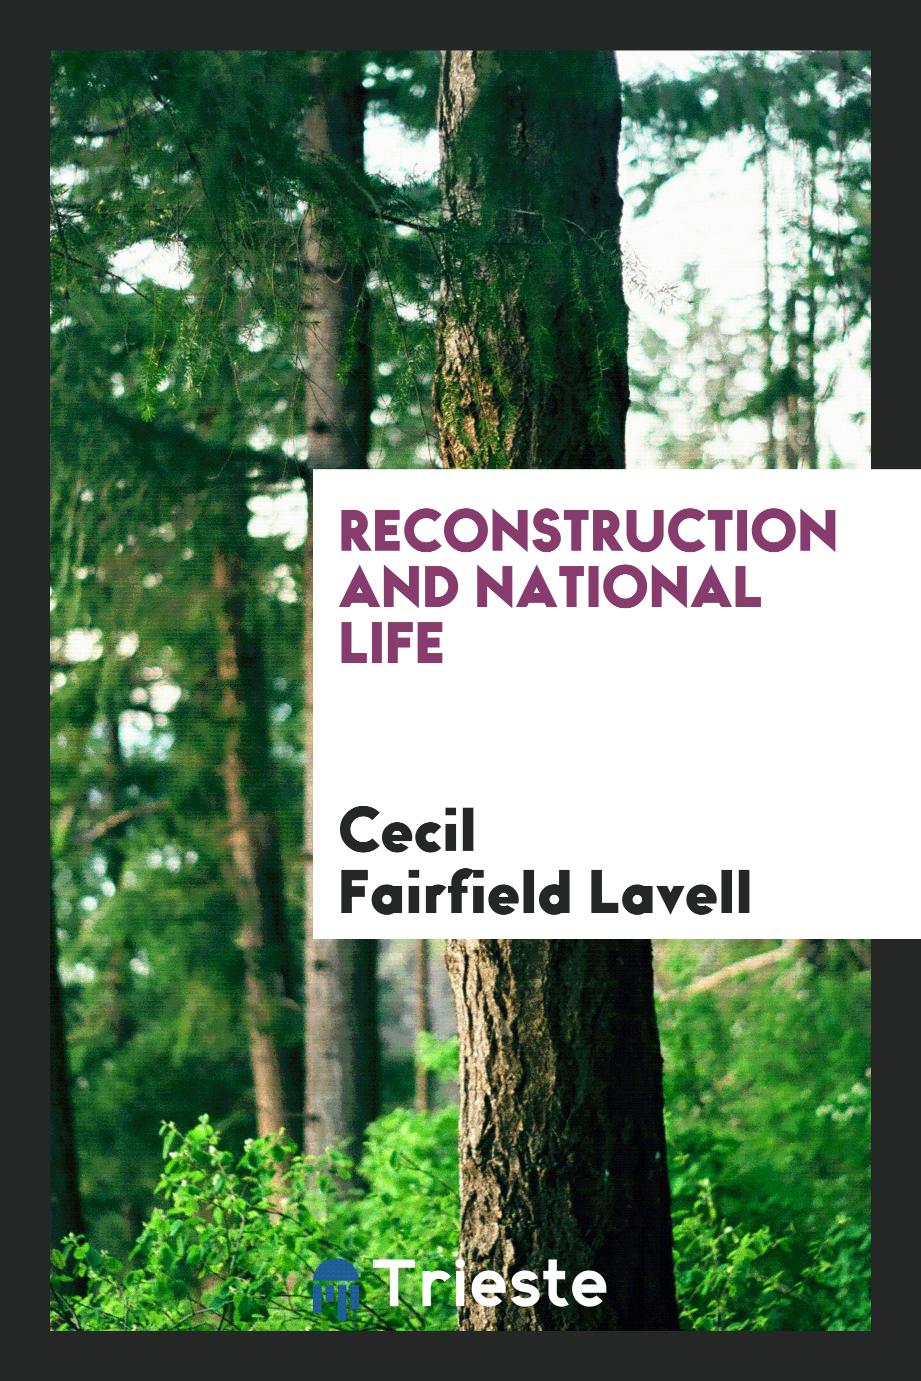 Reconstruction and national life